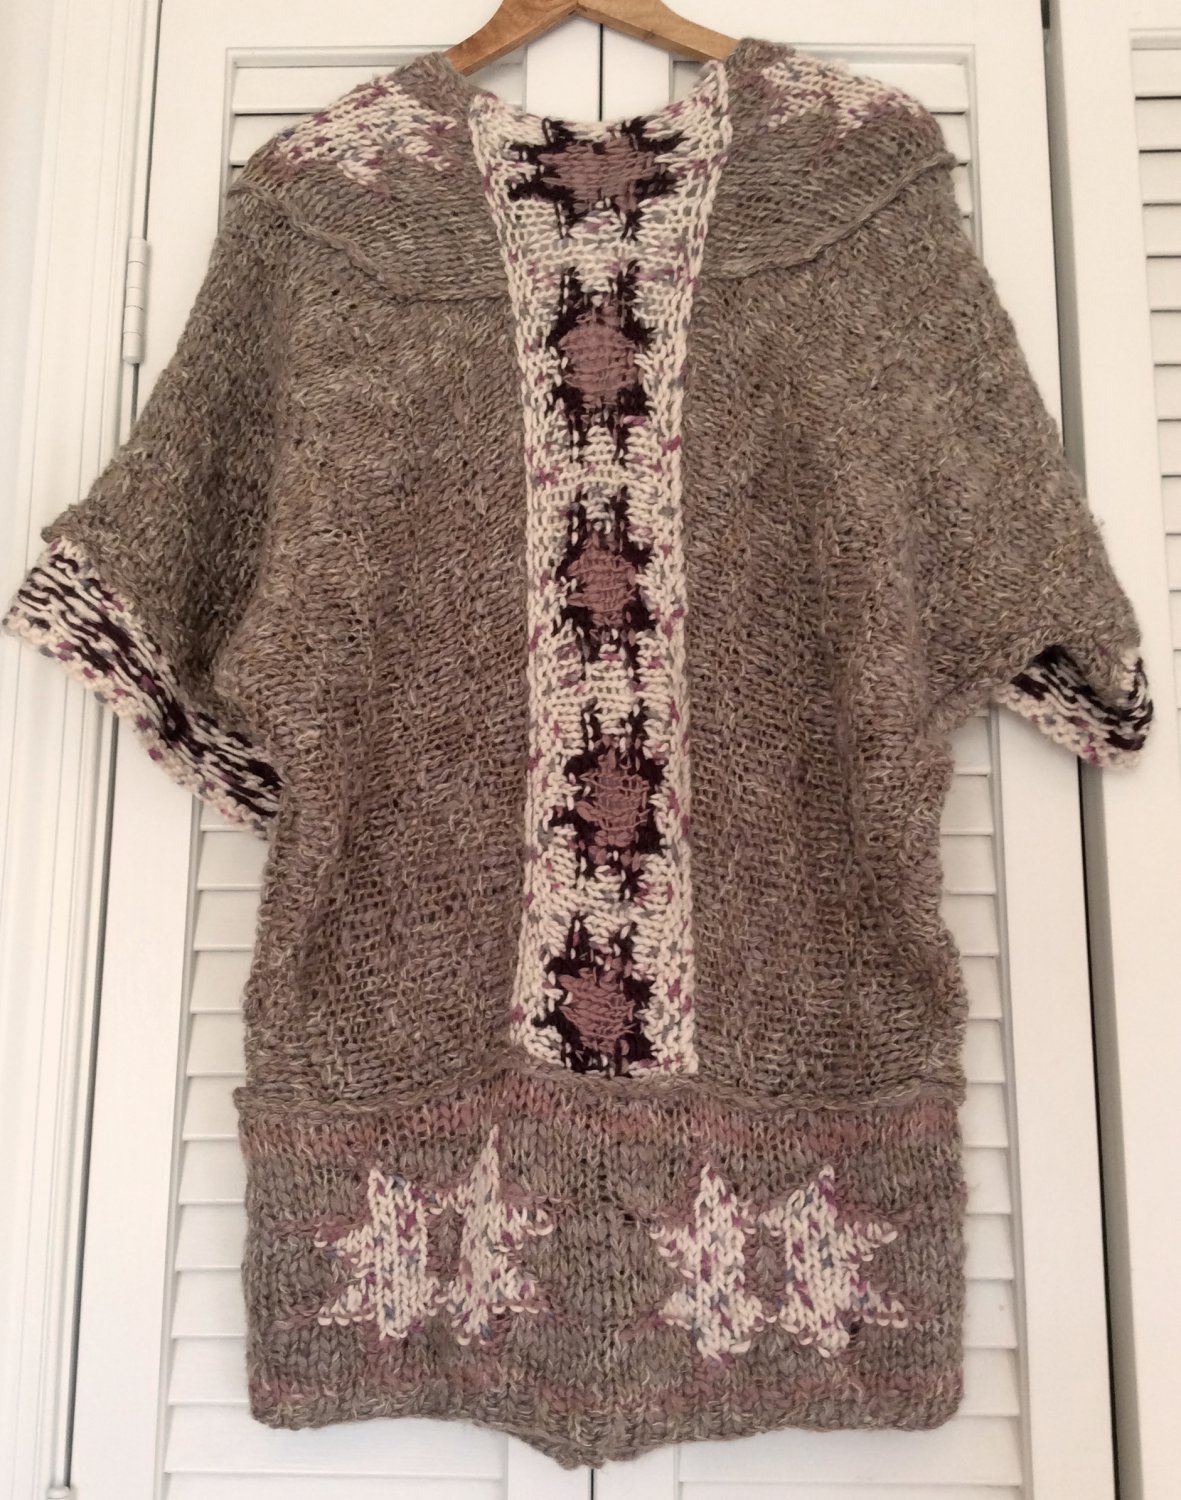 New FREE PEOPLE SWEATER Cardigan Duster Fair Isle Maxi Luxe Knit